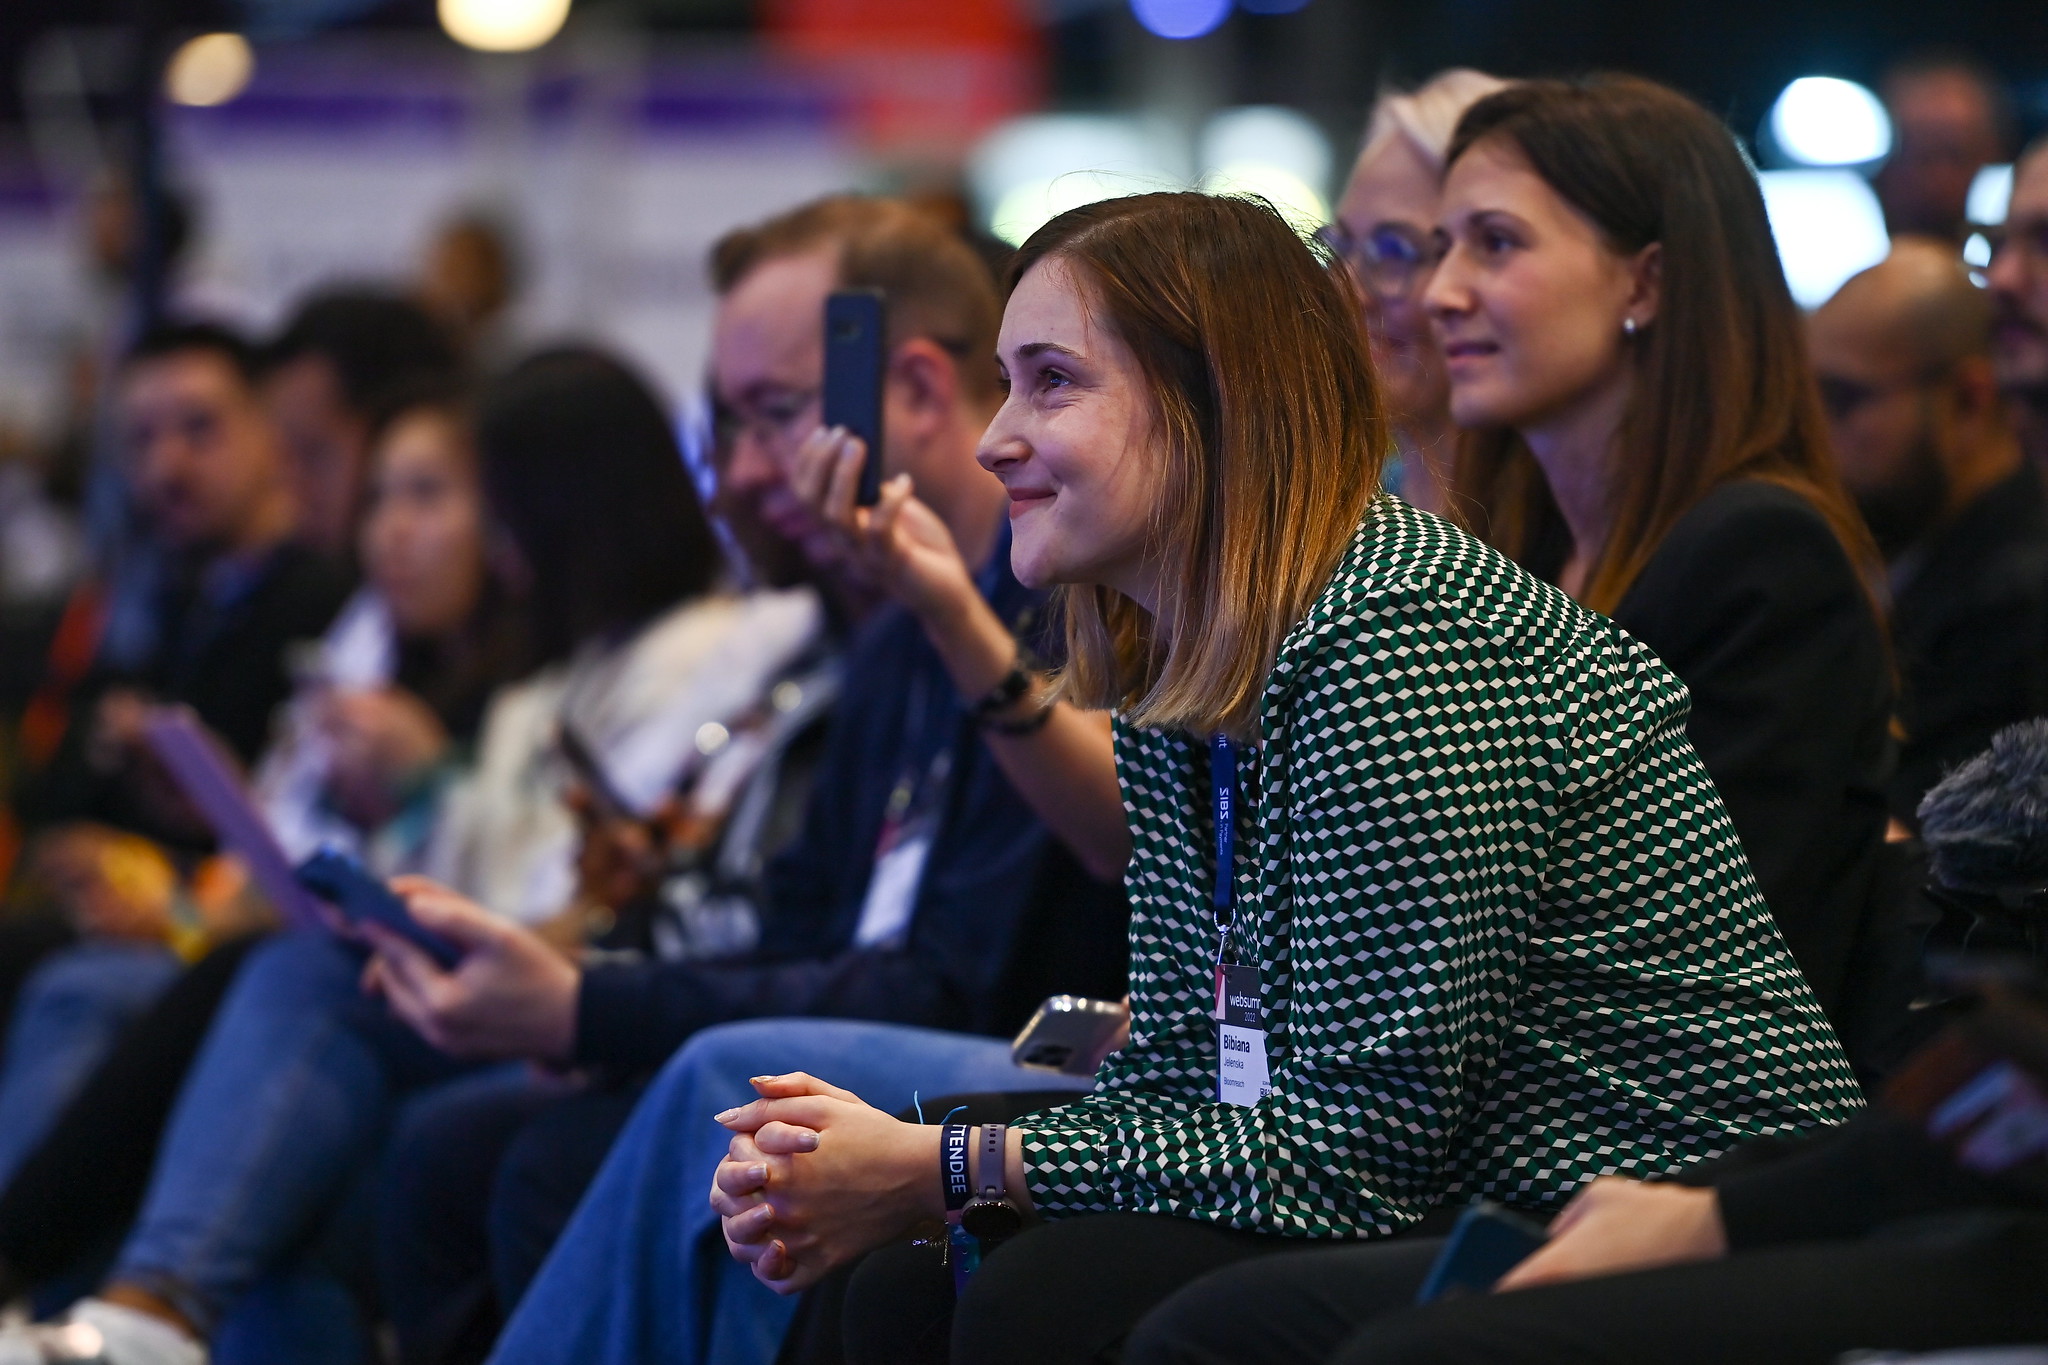 Attendees at Startup Showcase Stage during day three of Web Summit 2022 at the Altice Arena in Lisbon, Portugal.